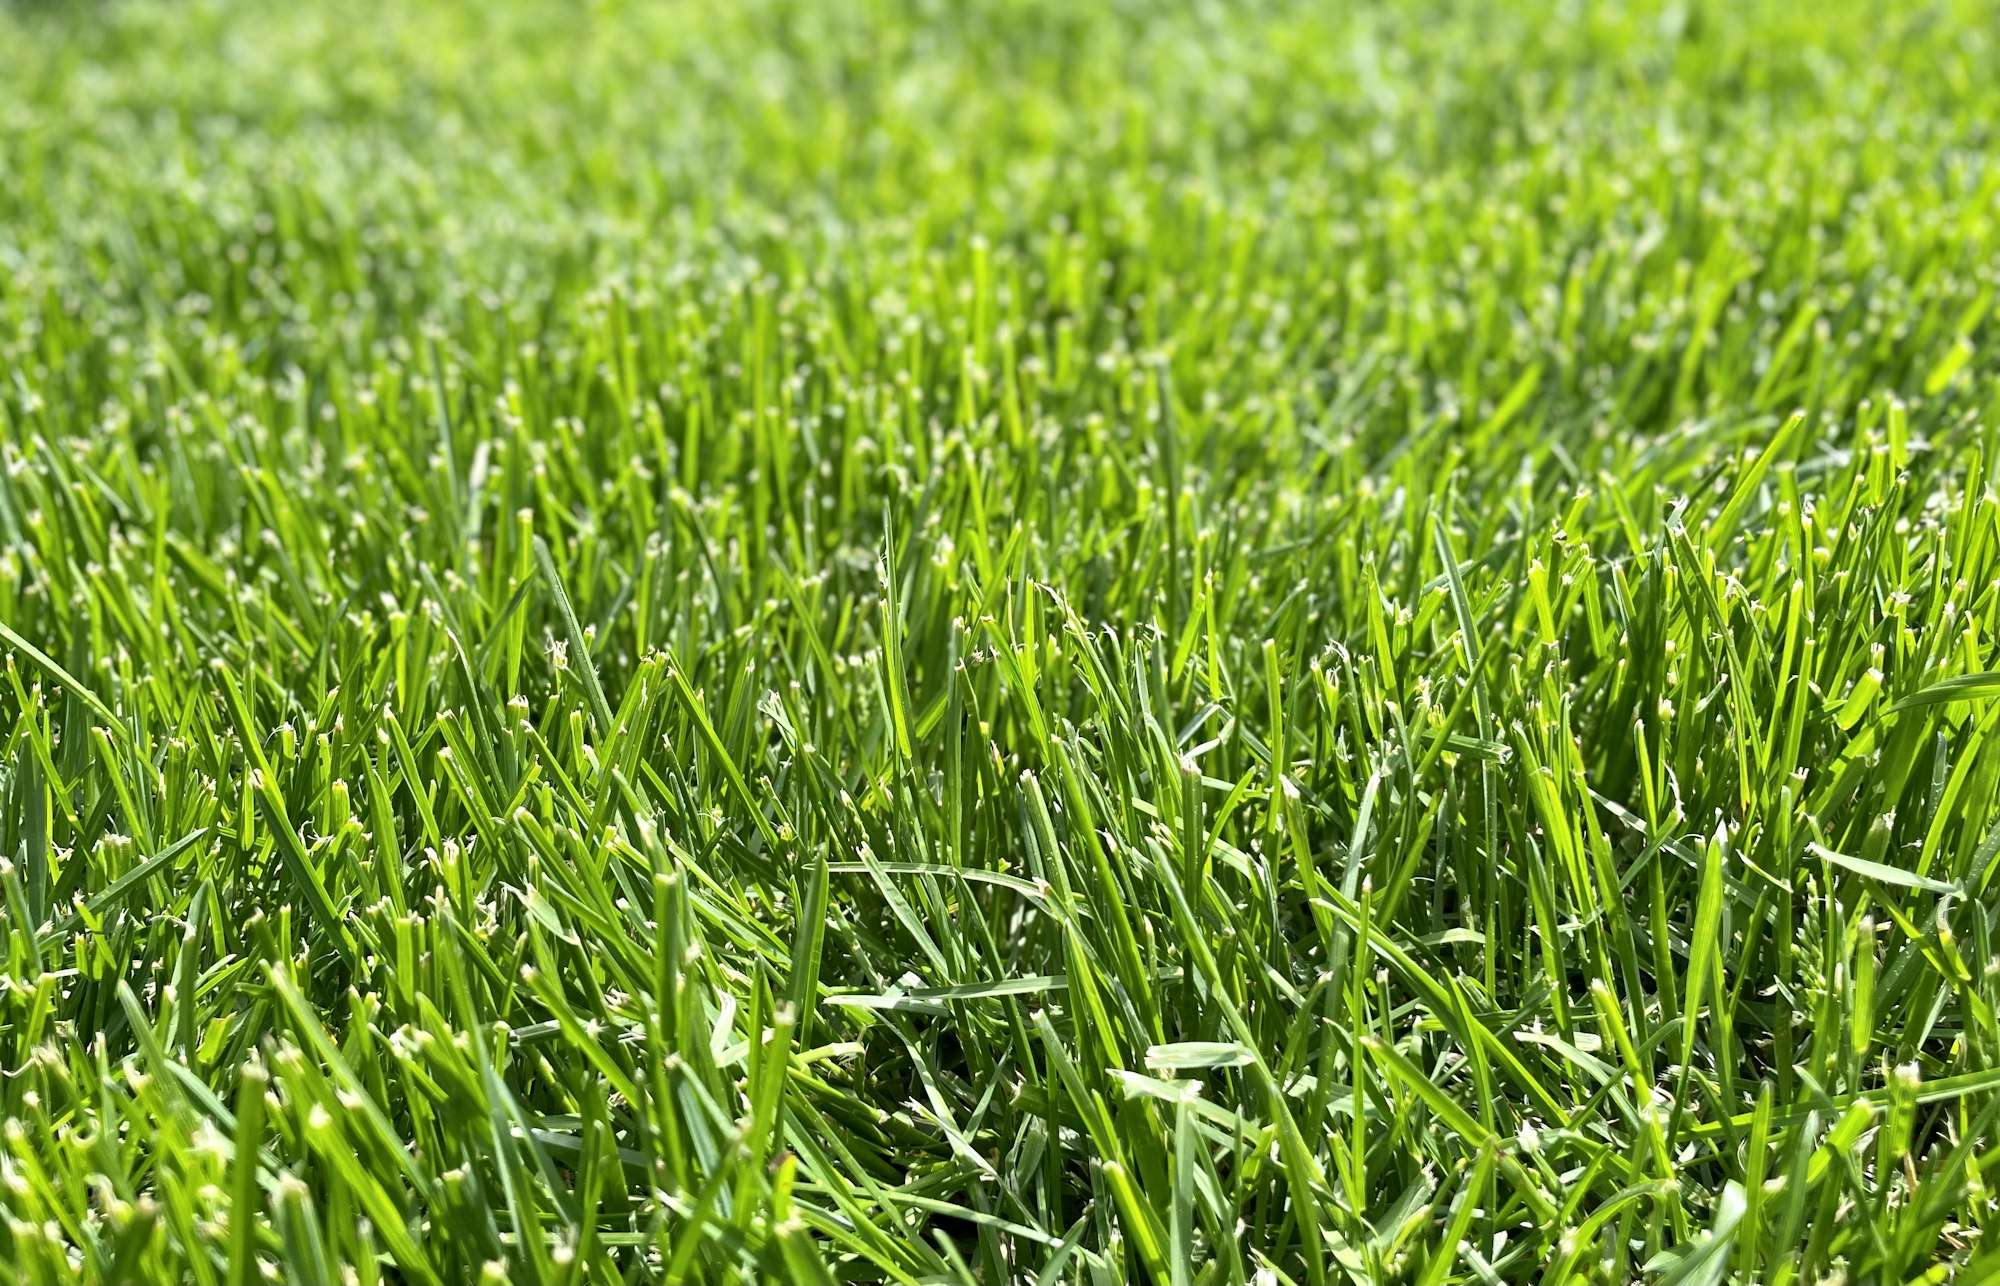 Thick lawn grasses